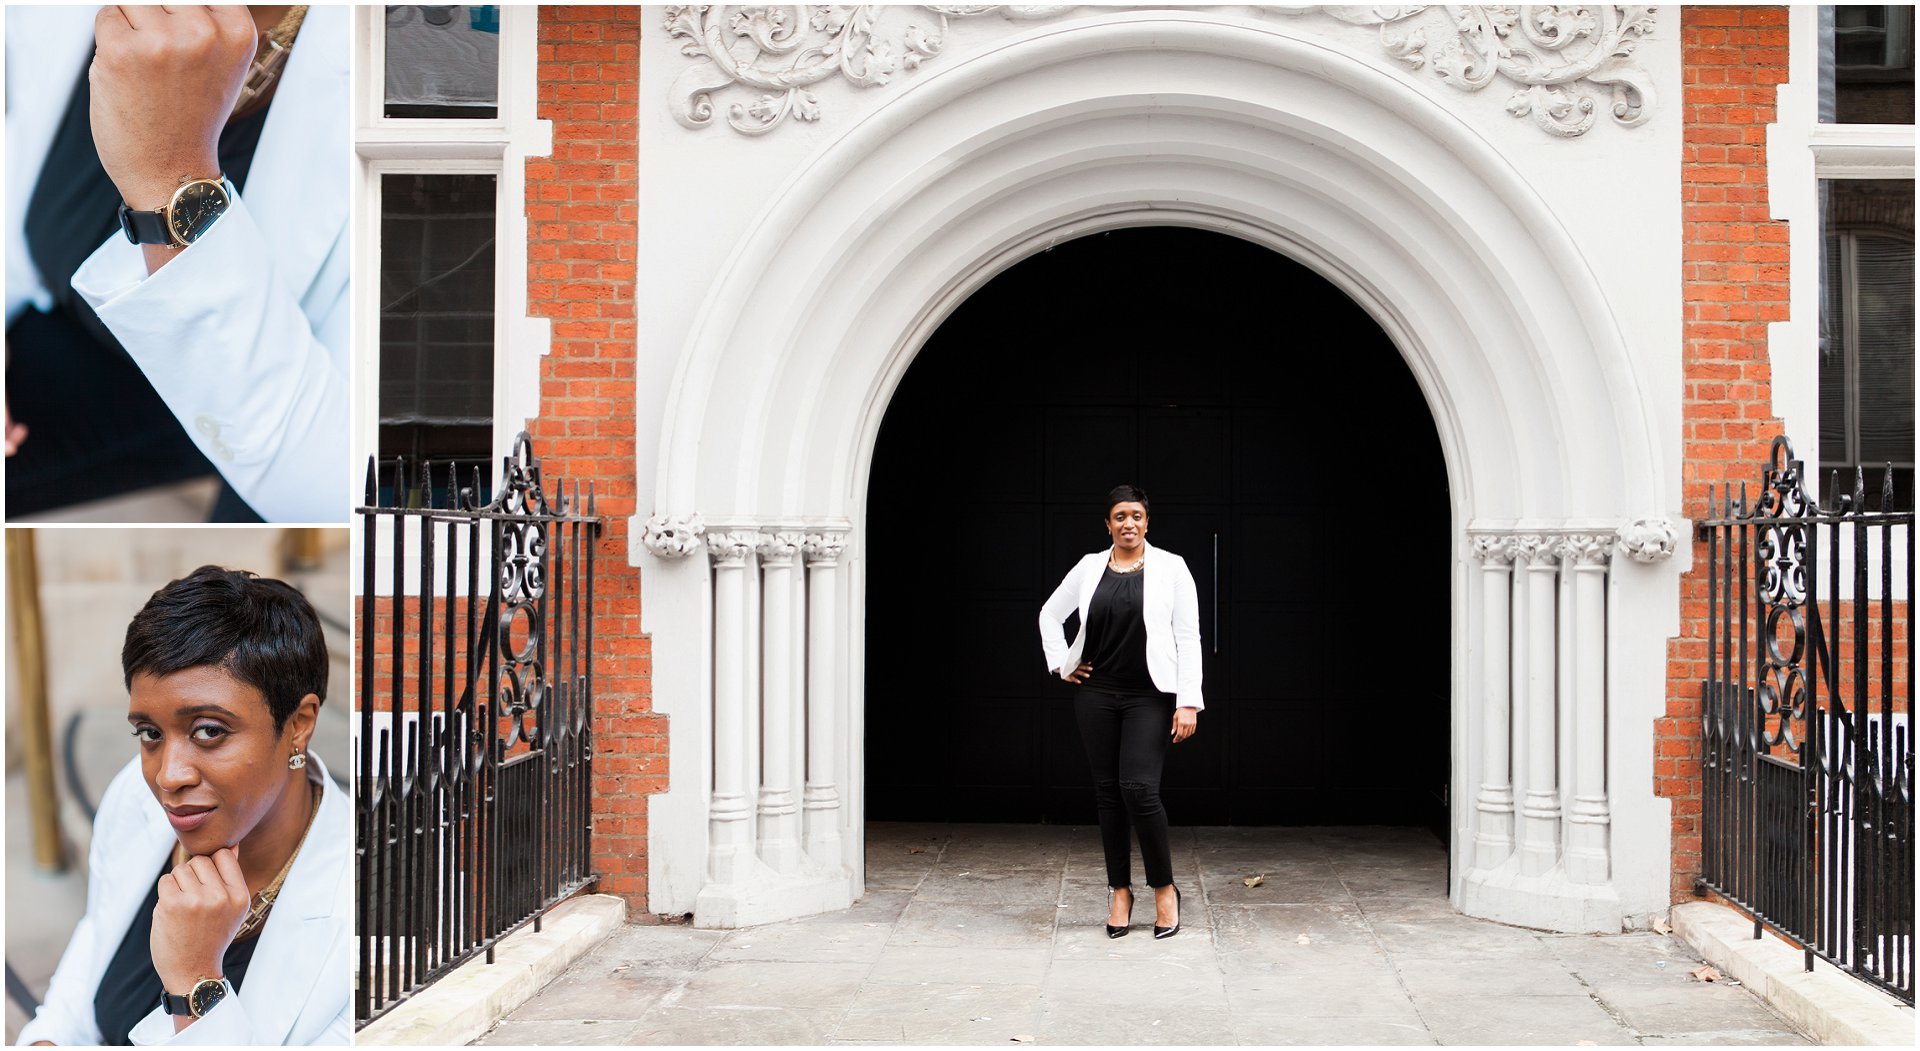 London brand shoot with SoniaMarie Consulting, London brand photographer AKP Branding Stories